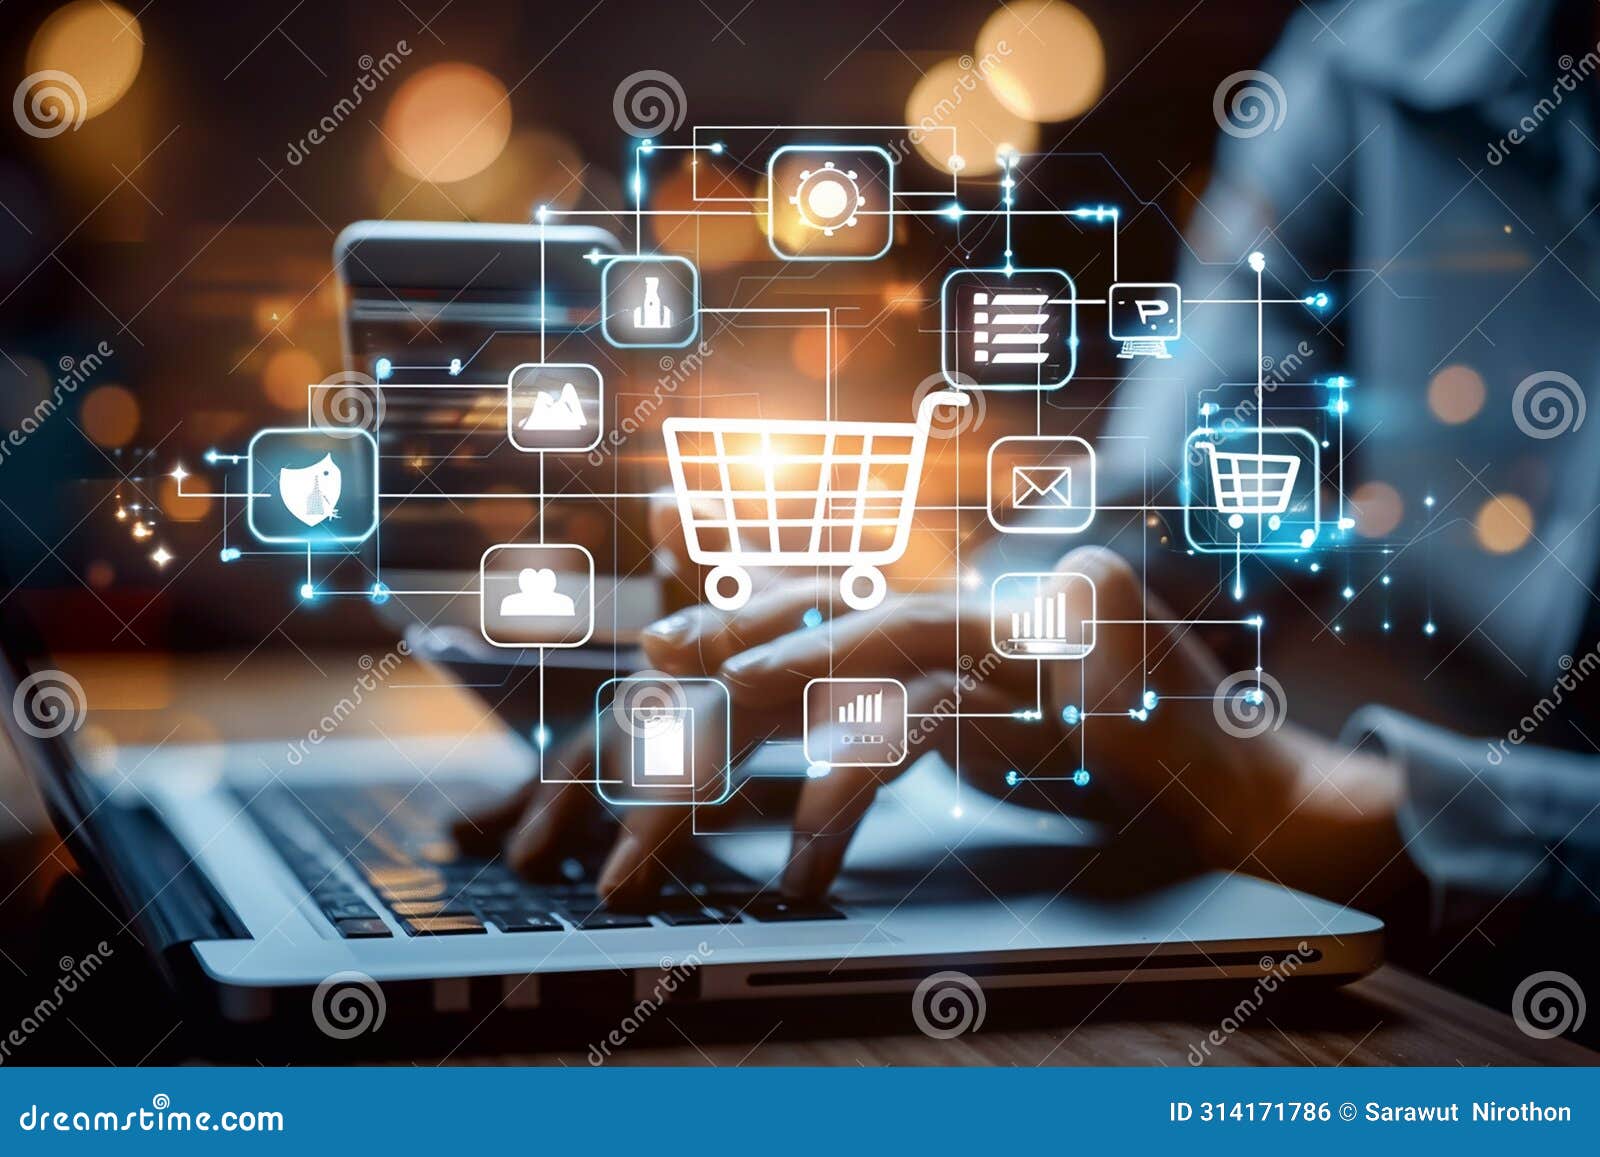 multichannel marketing for online retail business and digital app